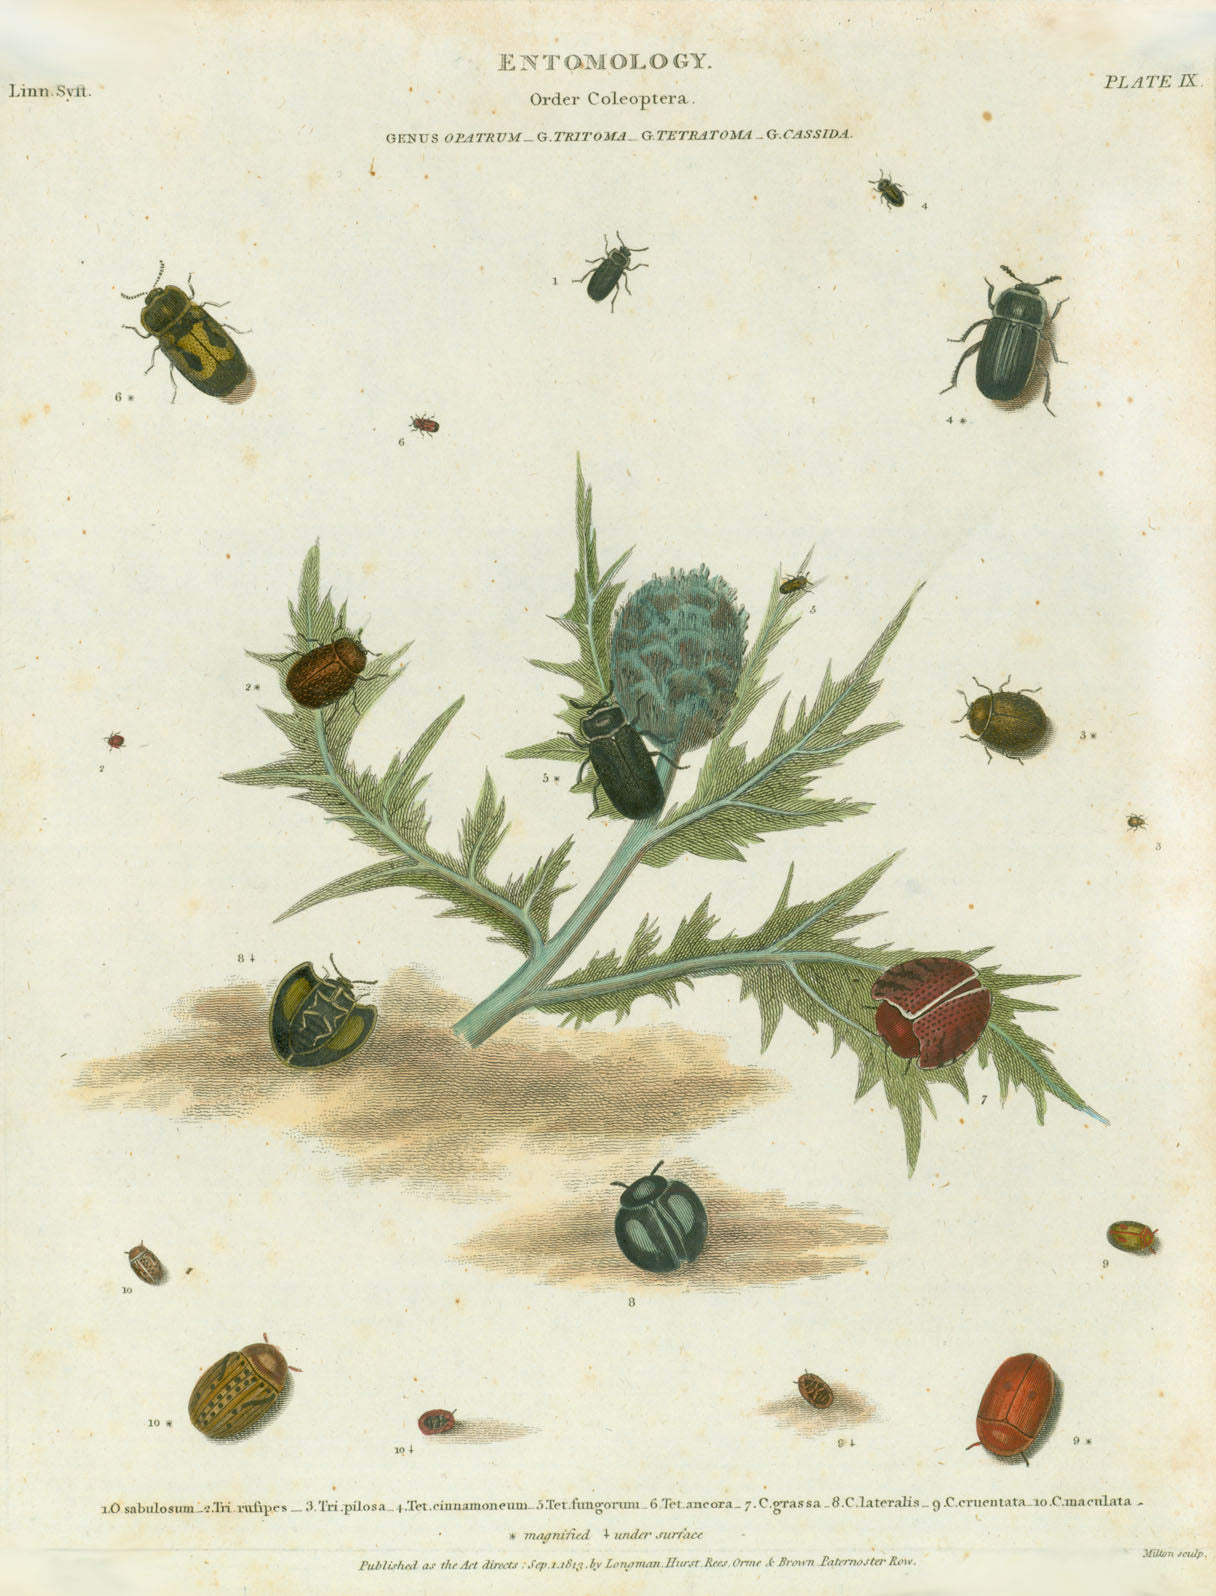 Copper etchings from: "Animated Nature" (London,1804-1809) each precisely dated.  Exquisite modern hand coloring. *** "Entomology Order Coleoptera Genus Opatrum G,. Tritoma G. Tetratoma G. Cassida"  Published Sep. 1813 Artichoke in the center.